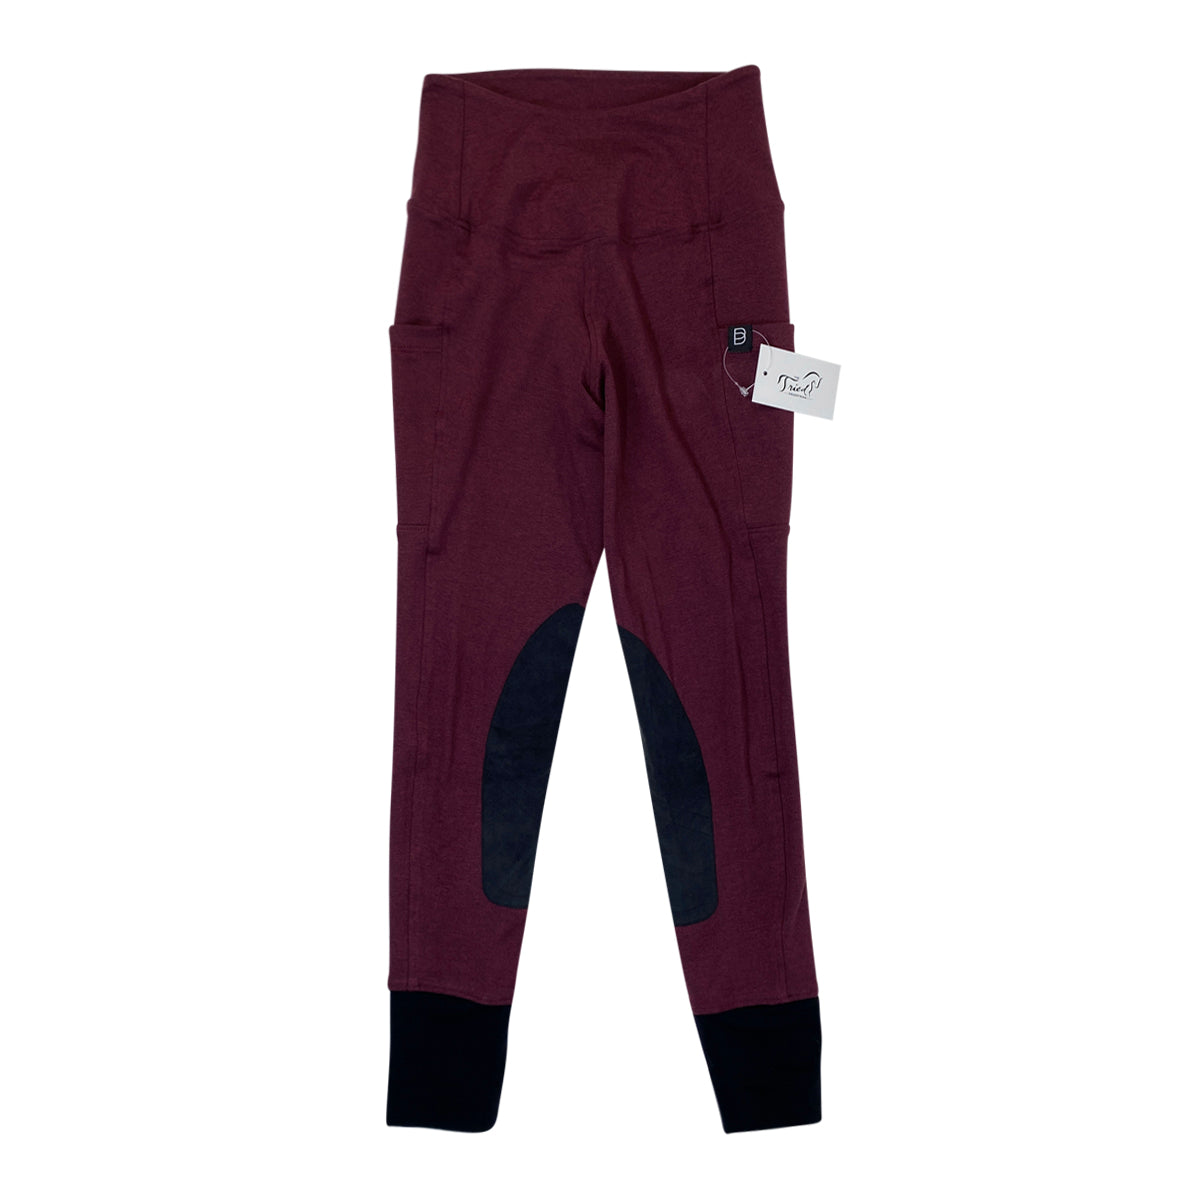 Botori &#39;Active Riding&#39; Tights in Wine